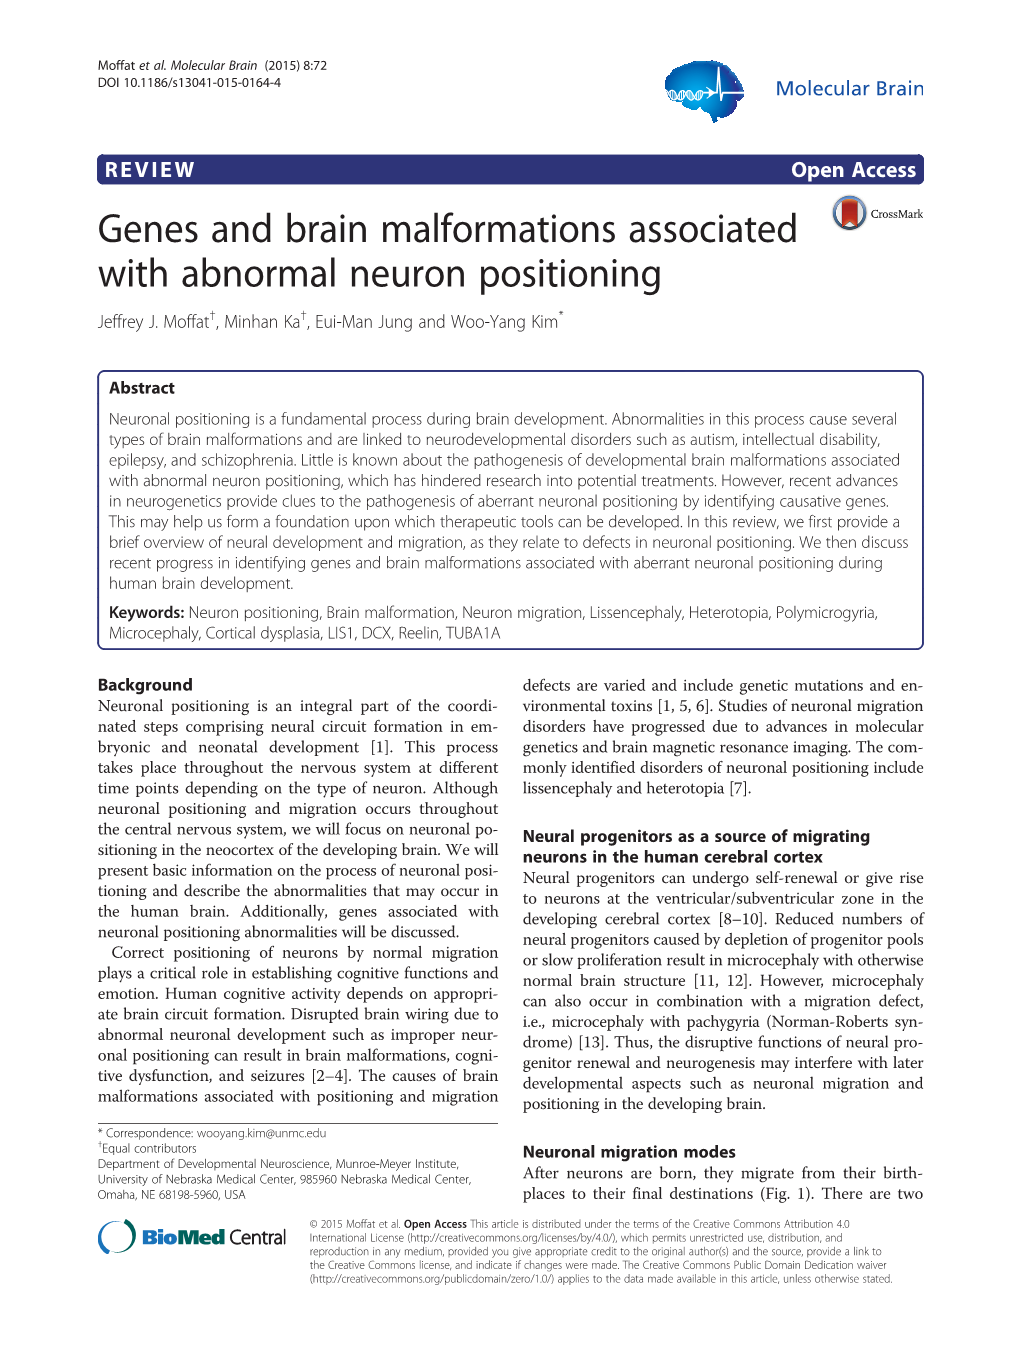 Genes and Brain Malformations Associated with Abnormal Neuron Positioning Jeffrey J